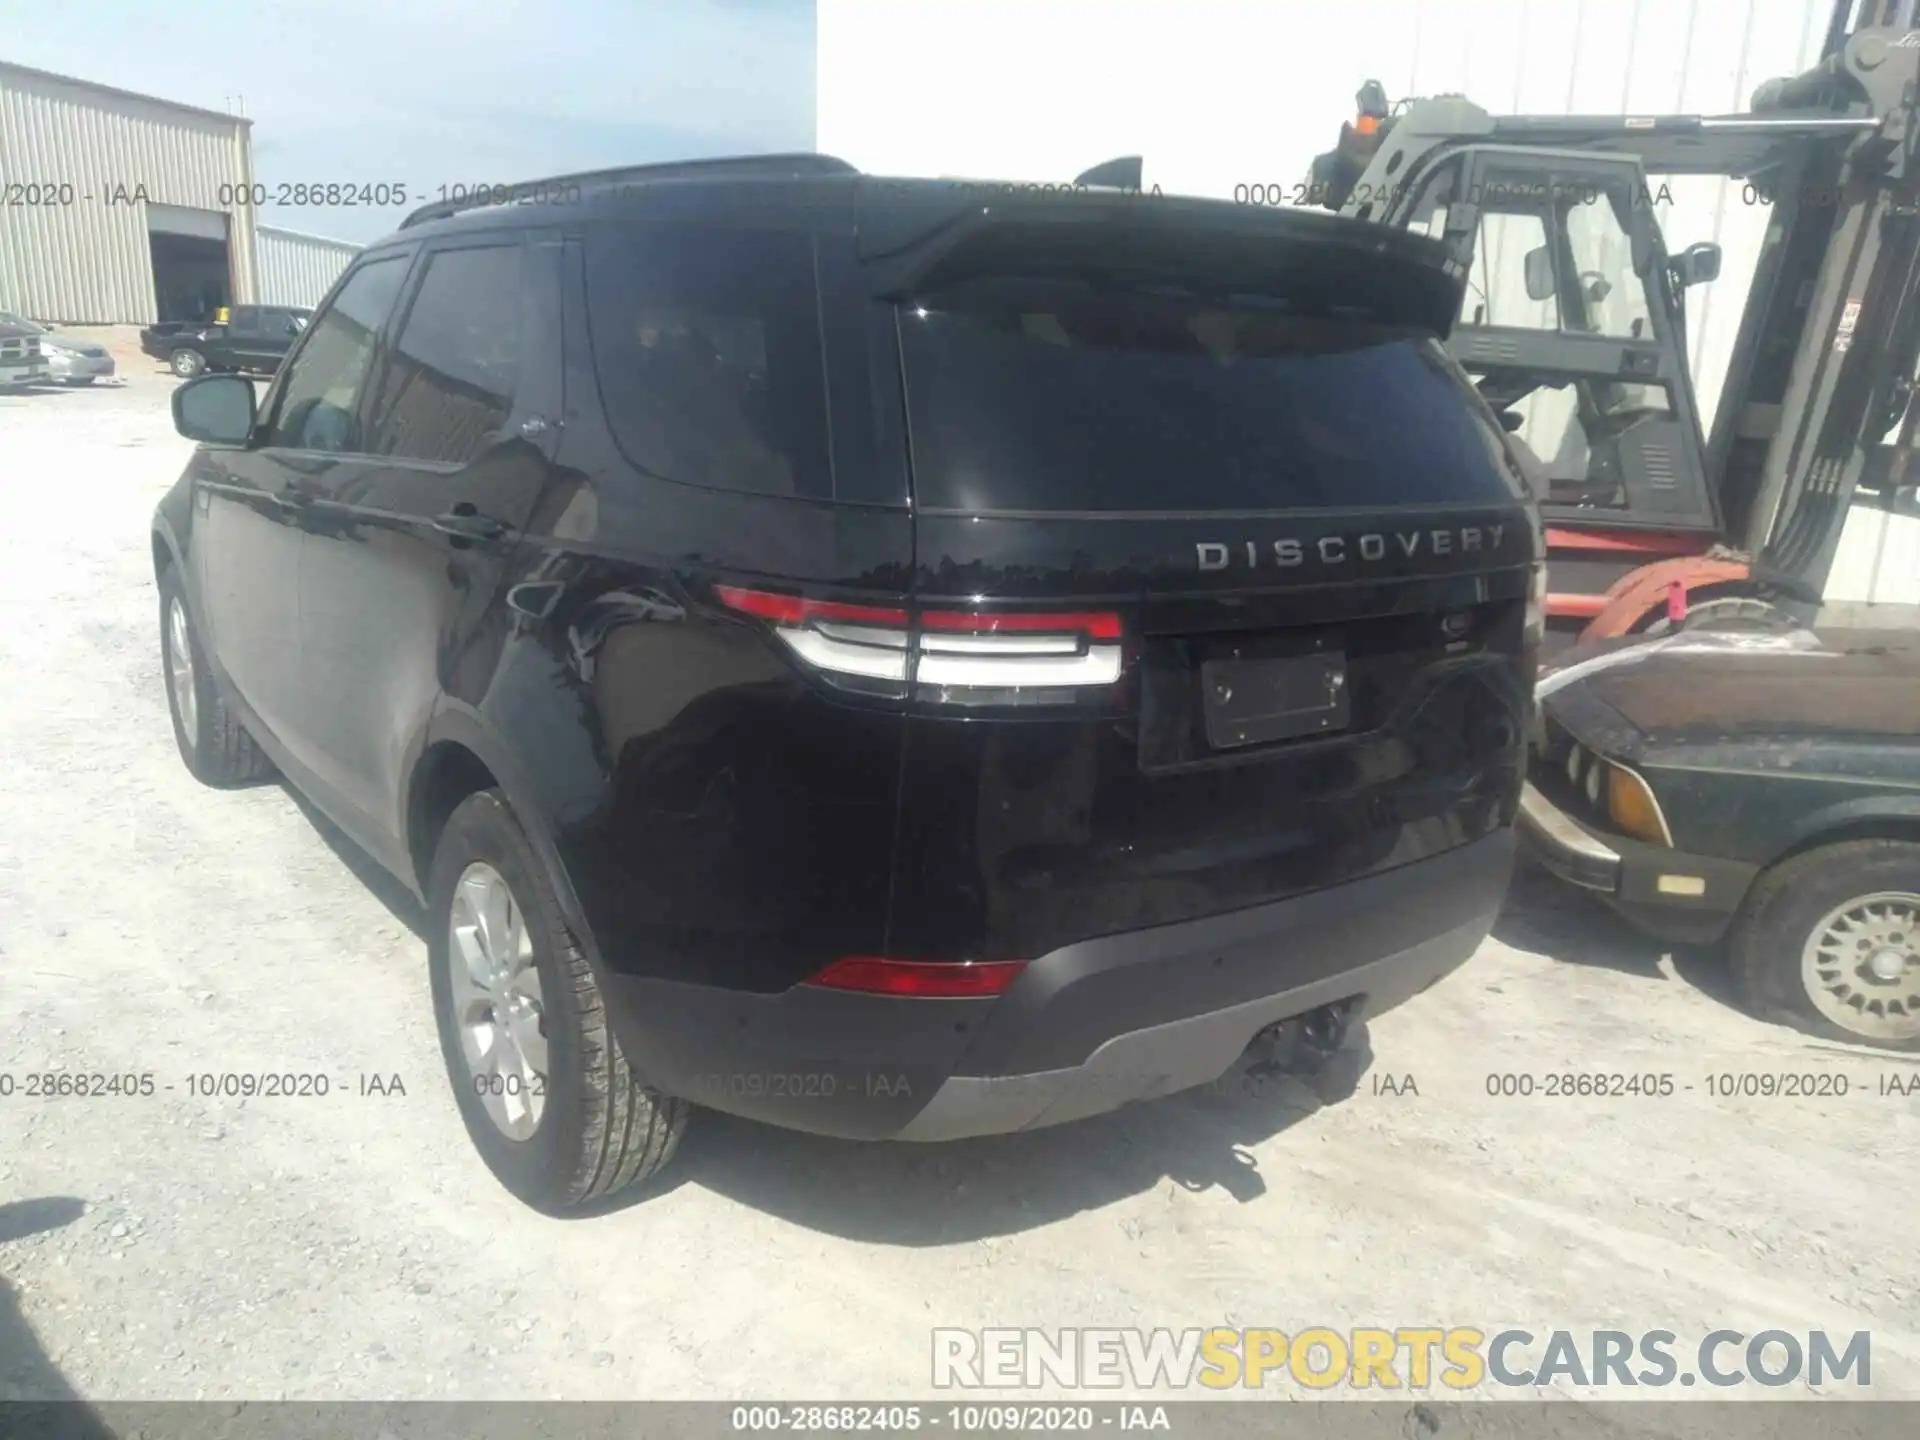 3 Photograph of a damaged car SALRG2RV1L2433289 LAND ROVER DISCOVERY 2020